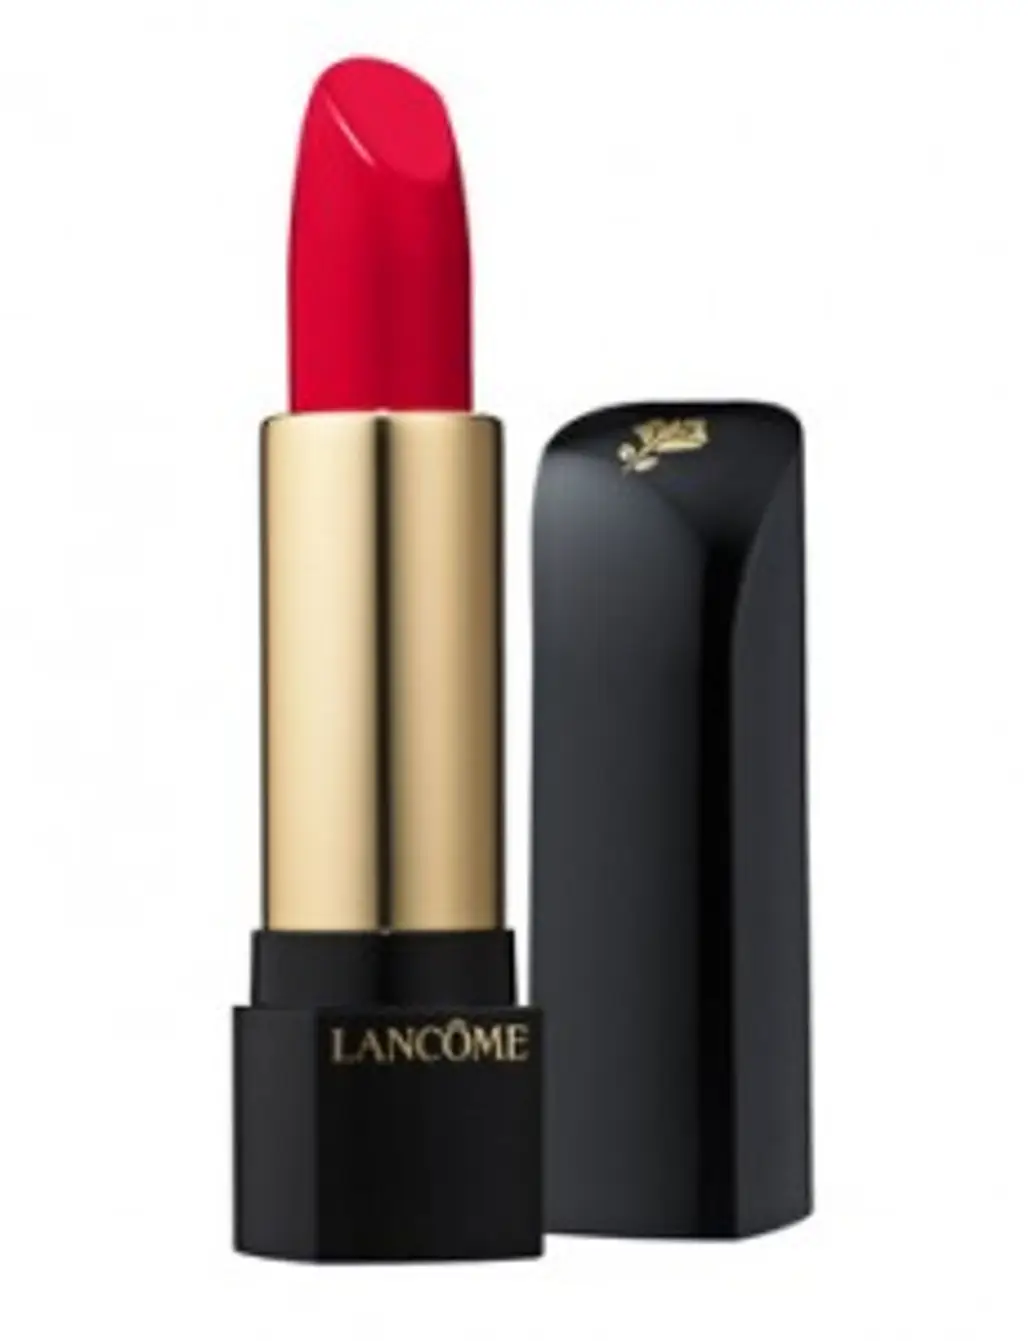 Lancôme L’Absolute Rouge Lipstick in "Rouge Velour"